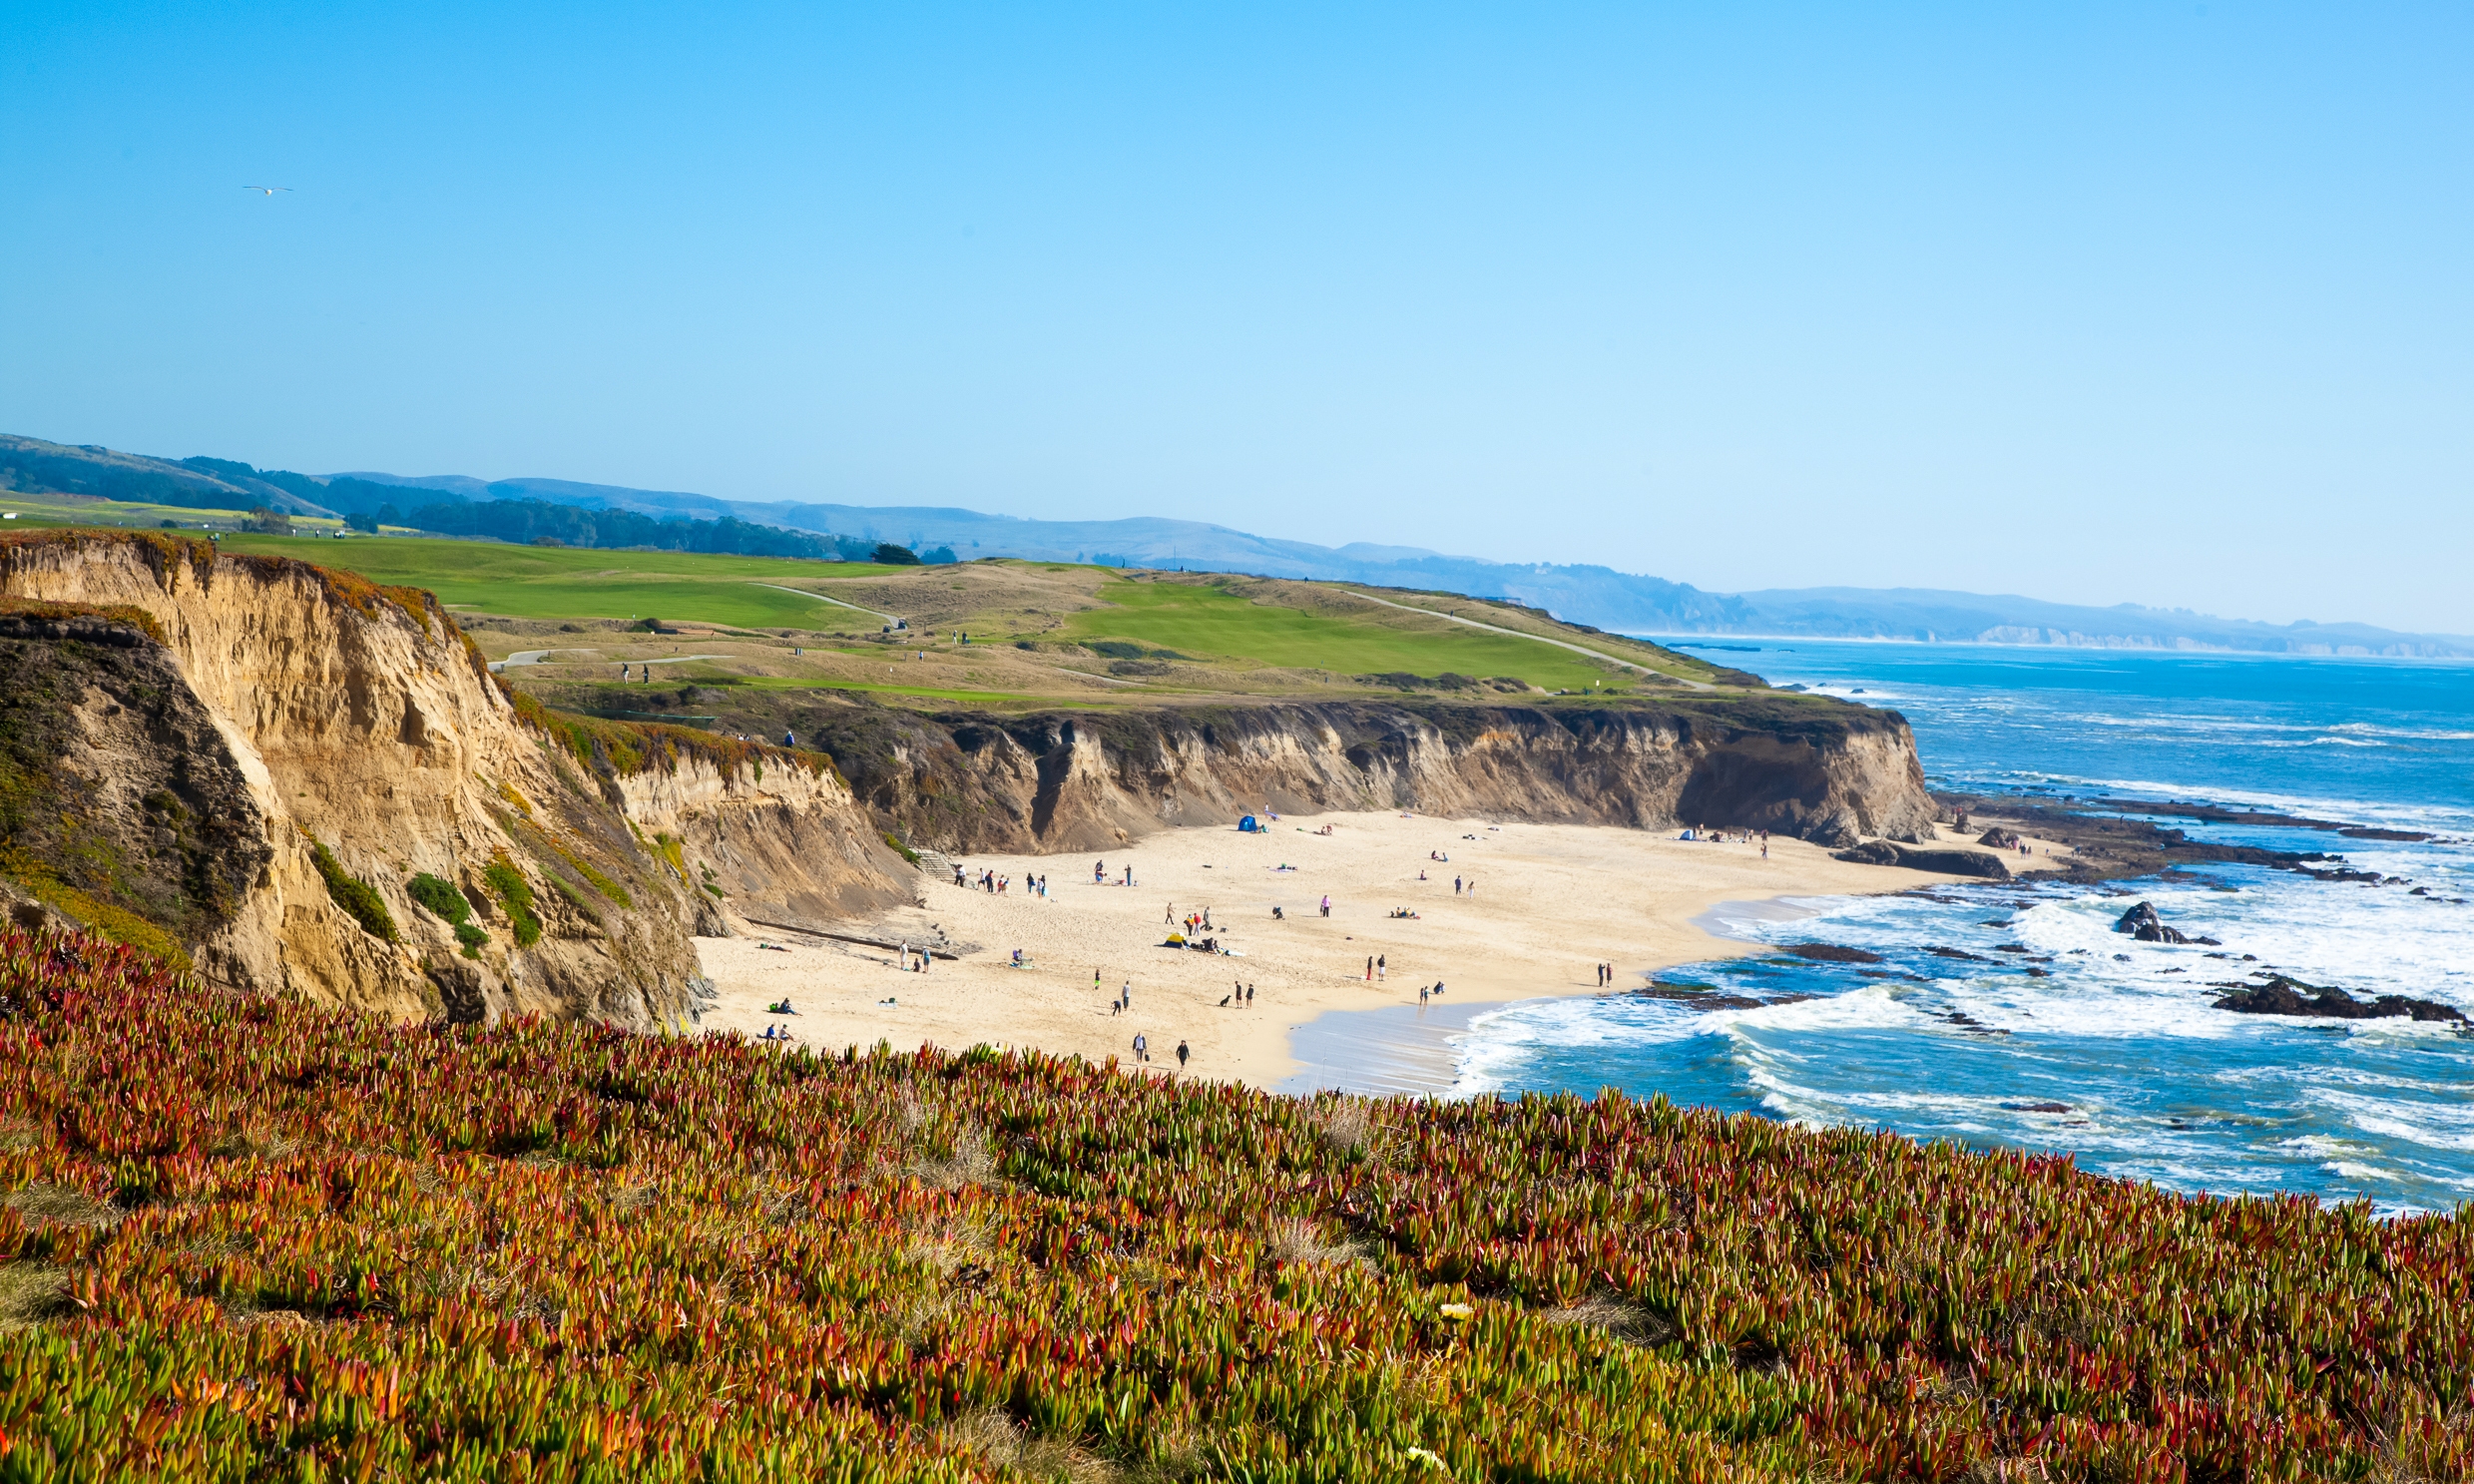 Coming to Half Moon Bay Beaches This Summer? ﻿Here are Tips and